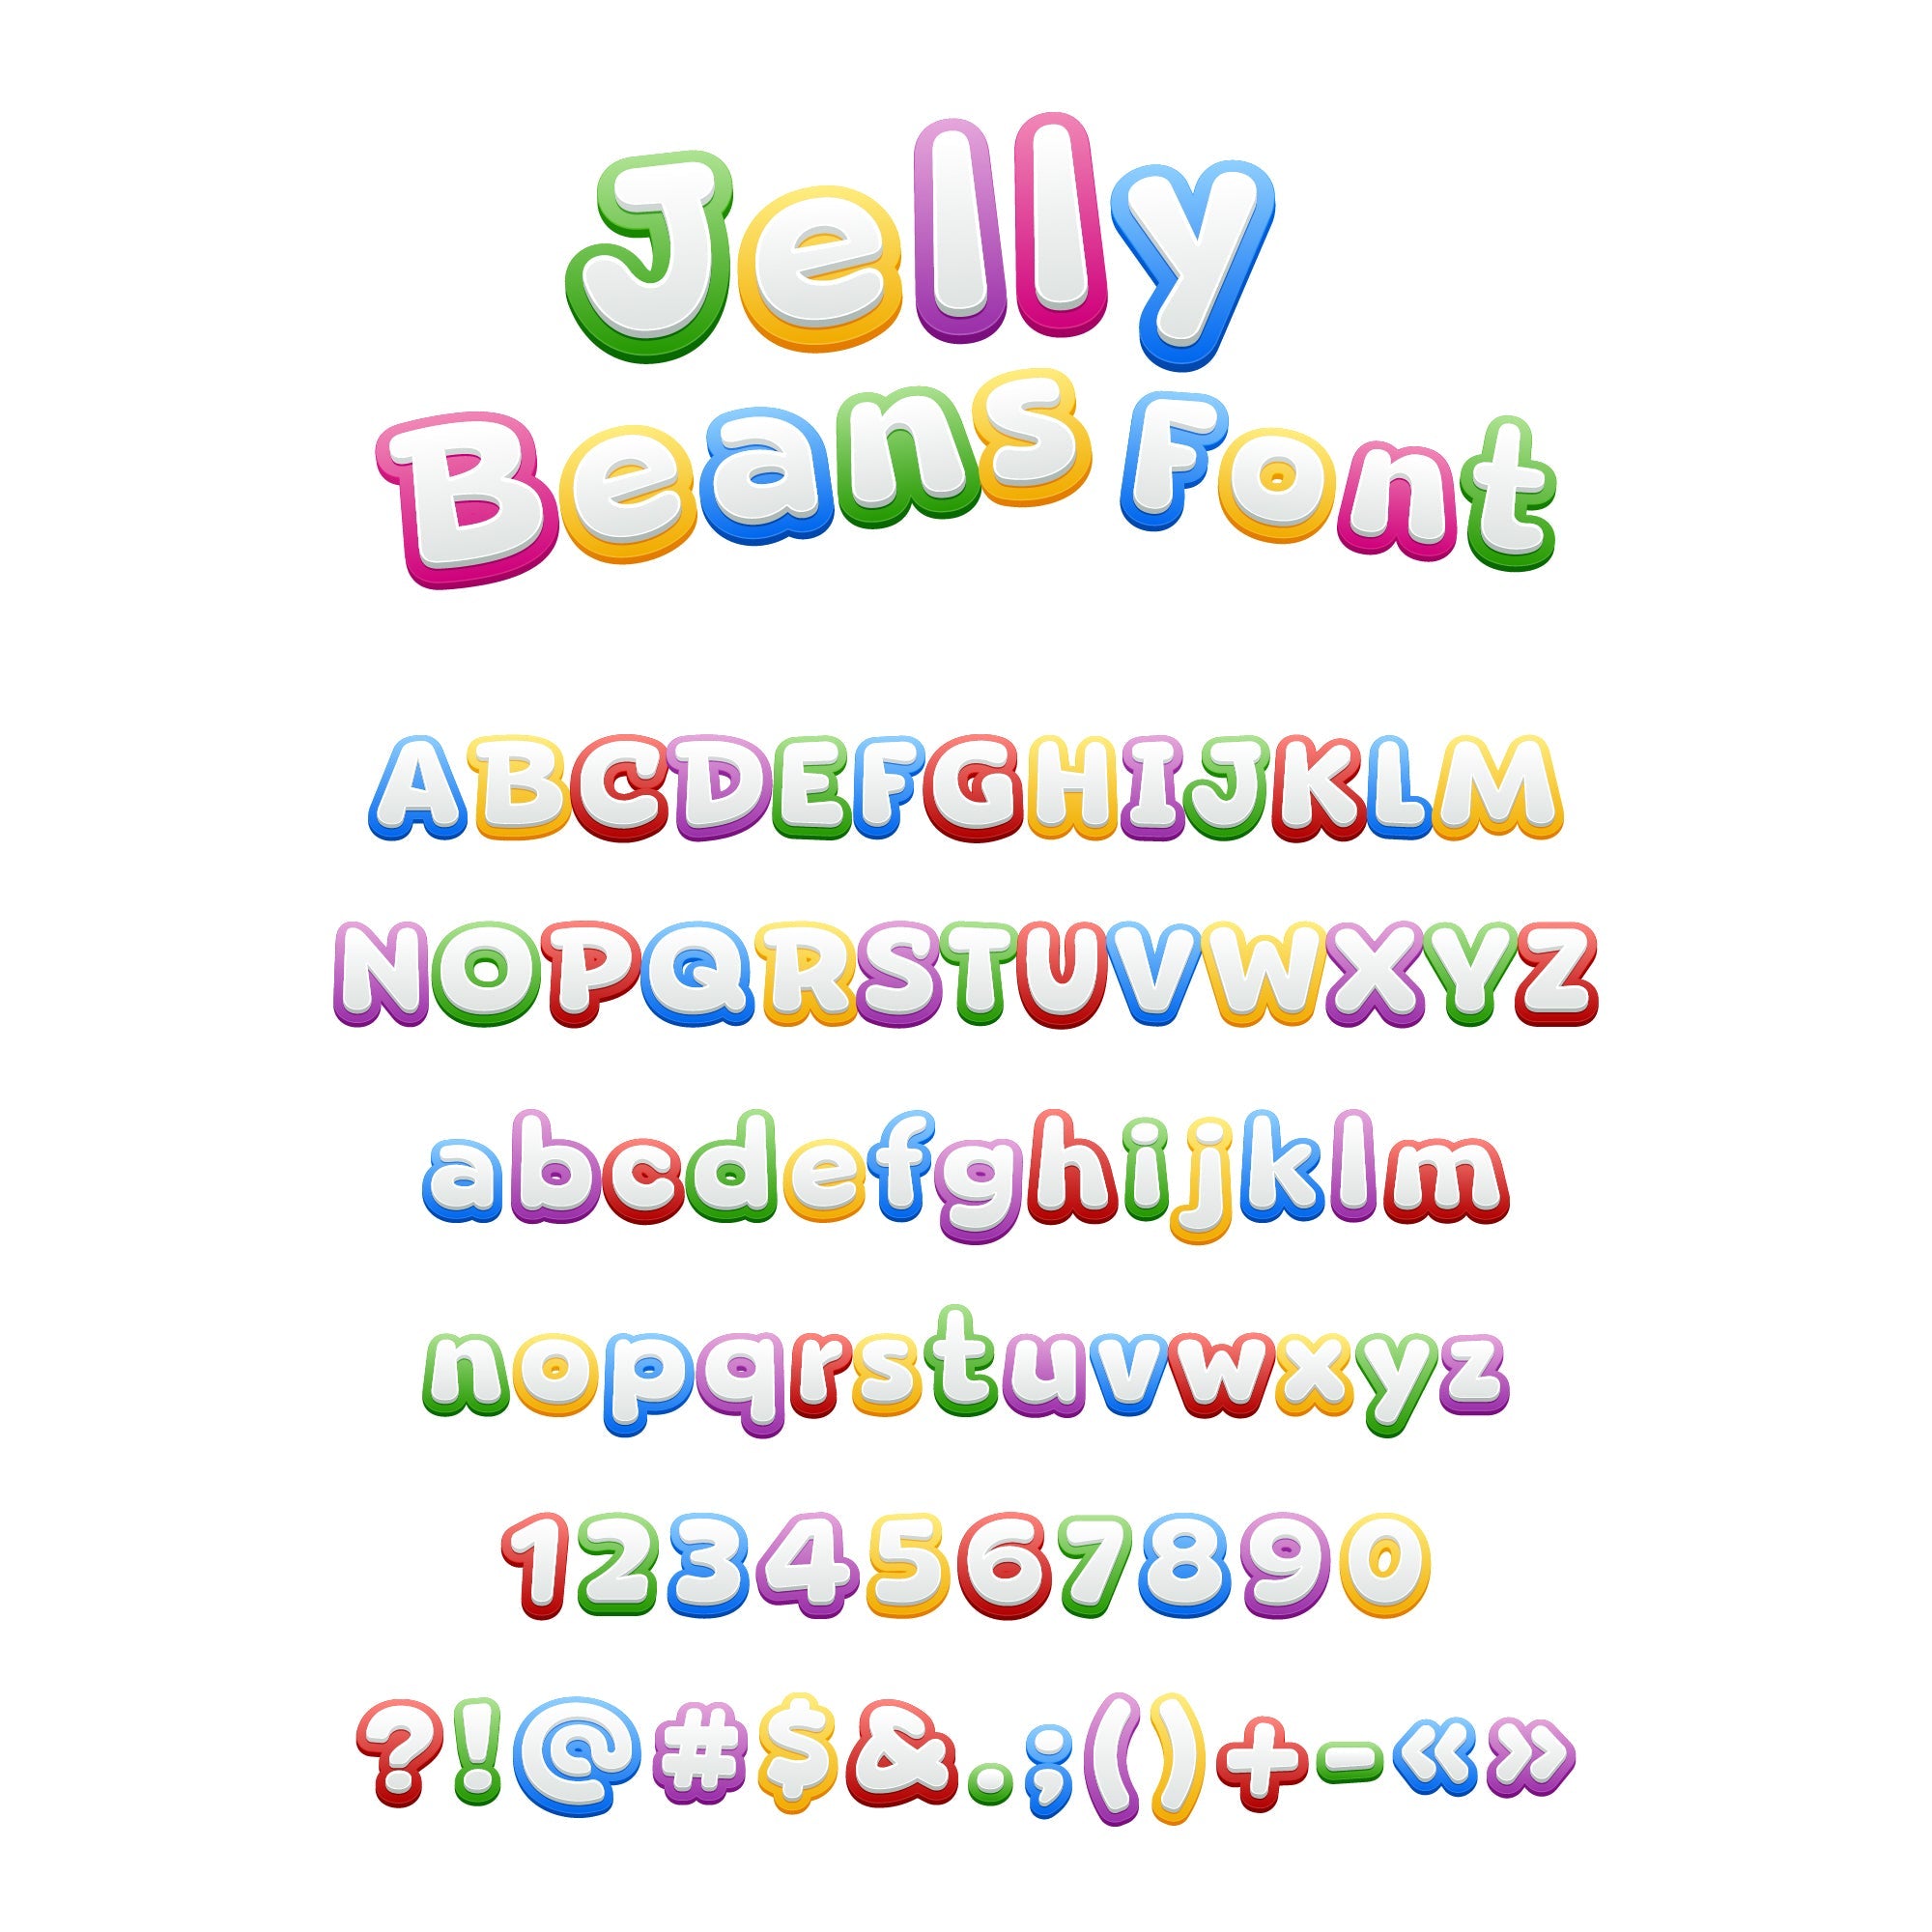 Jelly-Bean Font Pet ID Tag by Bashtags